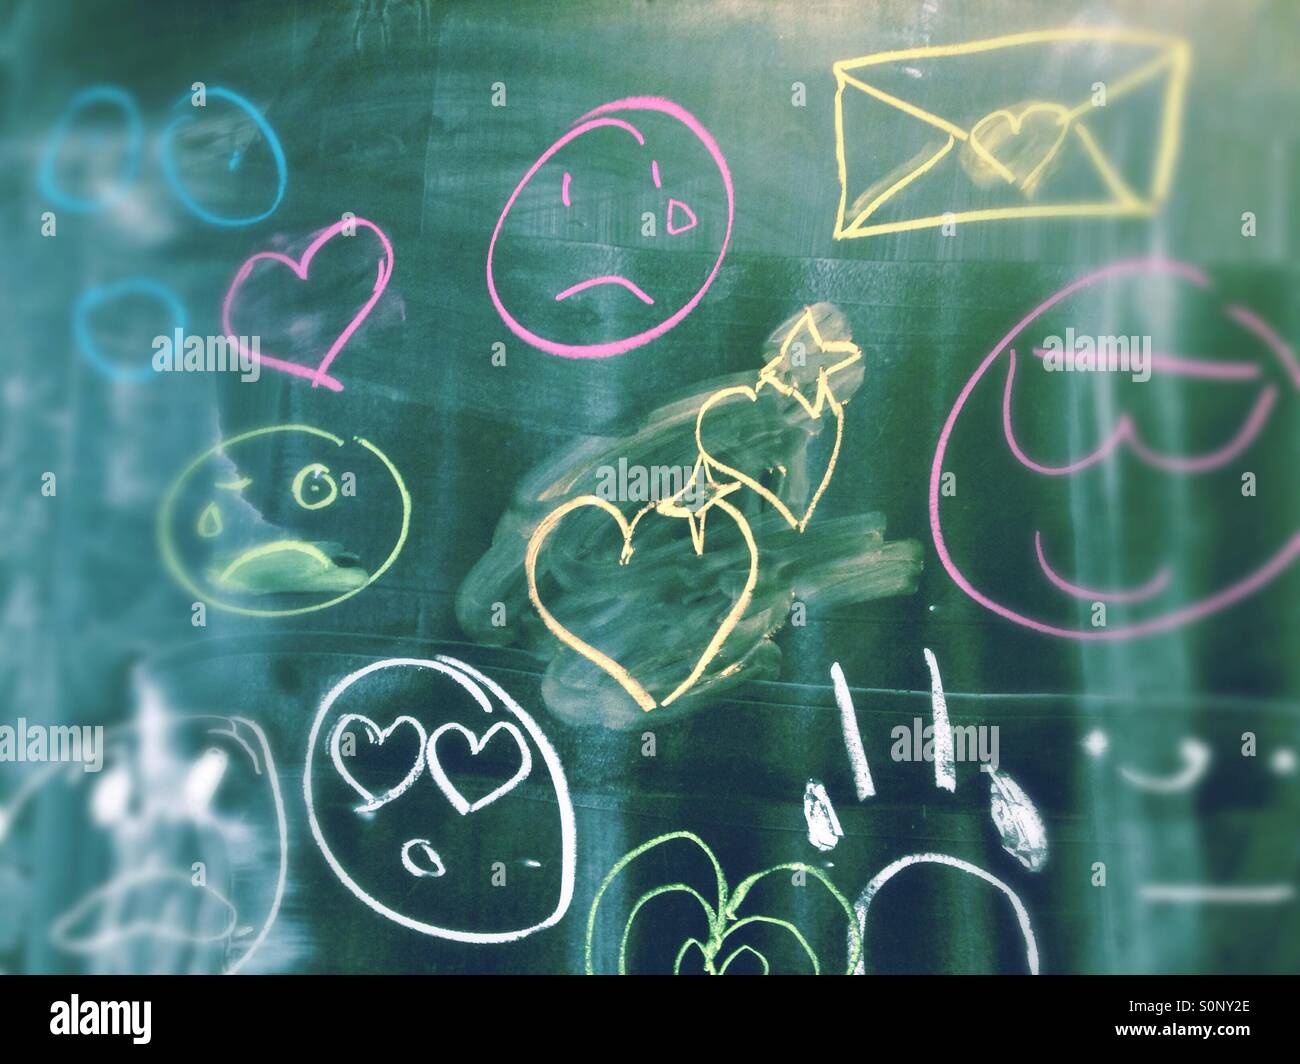 Analogue emojis and emoticons written on a blackboard at school with chalk in different colours Stock Photo